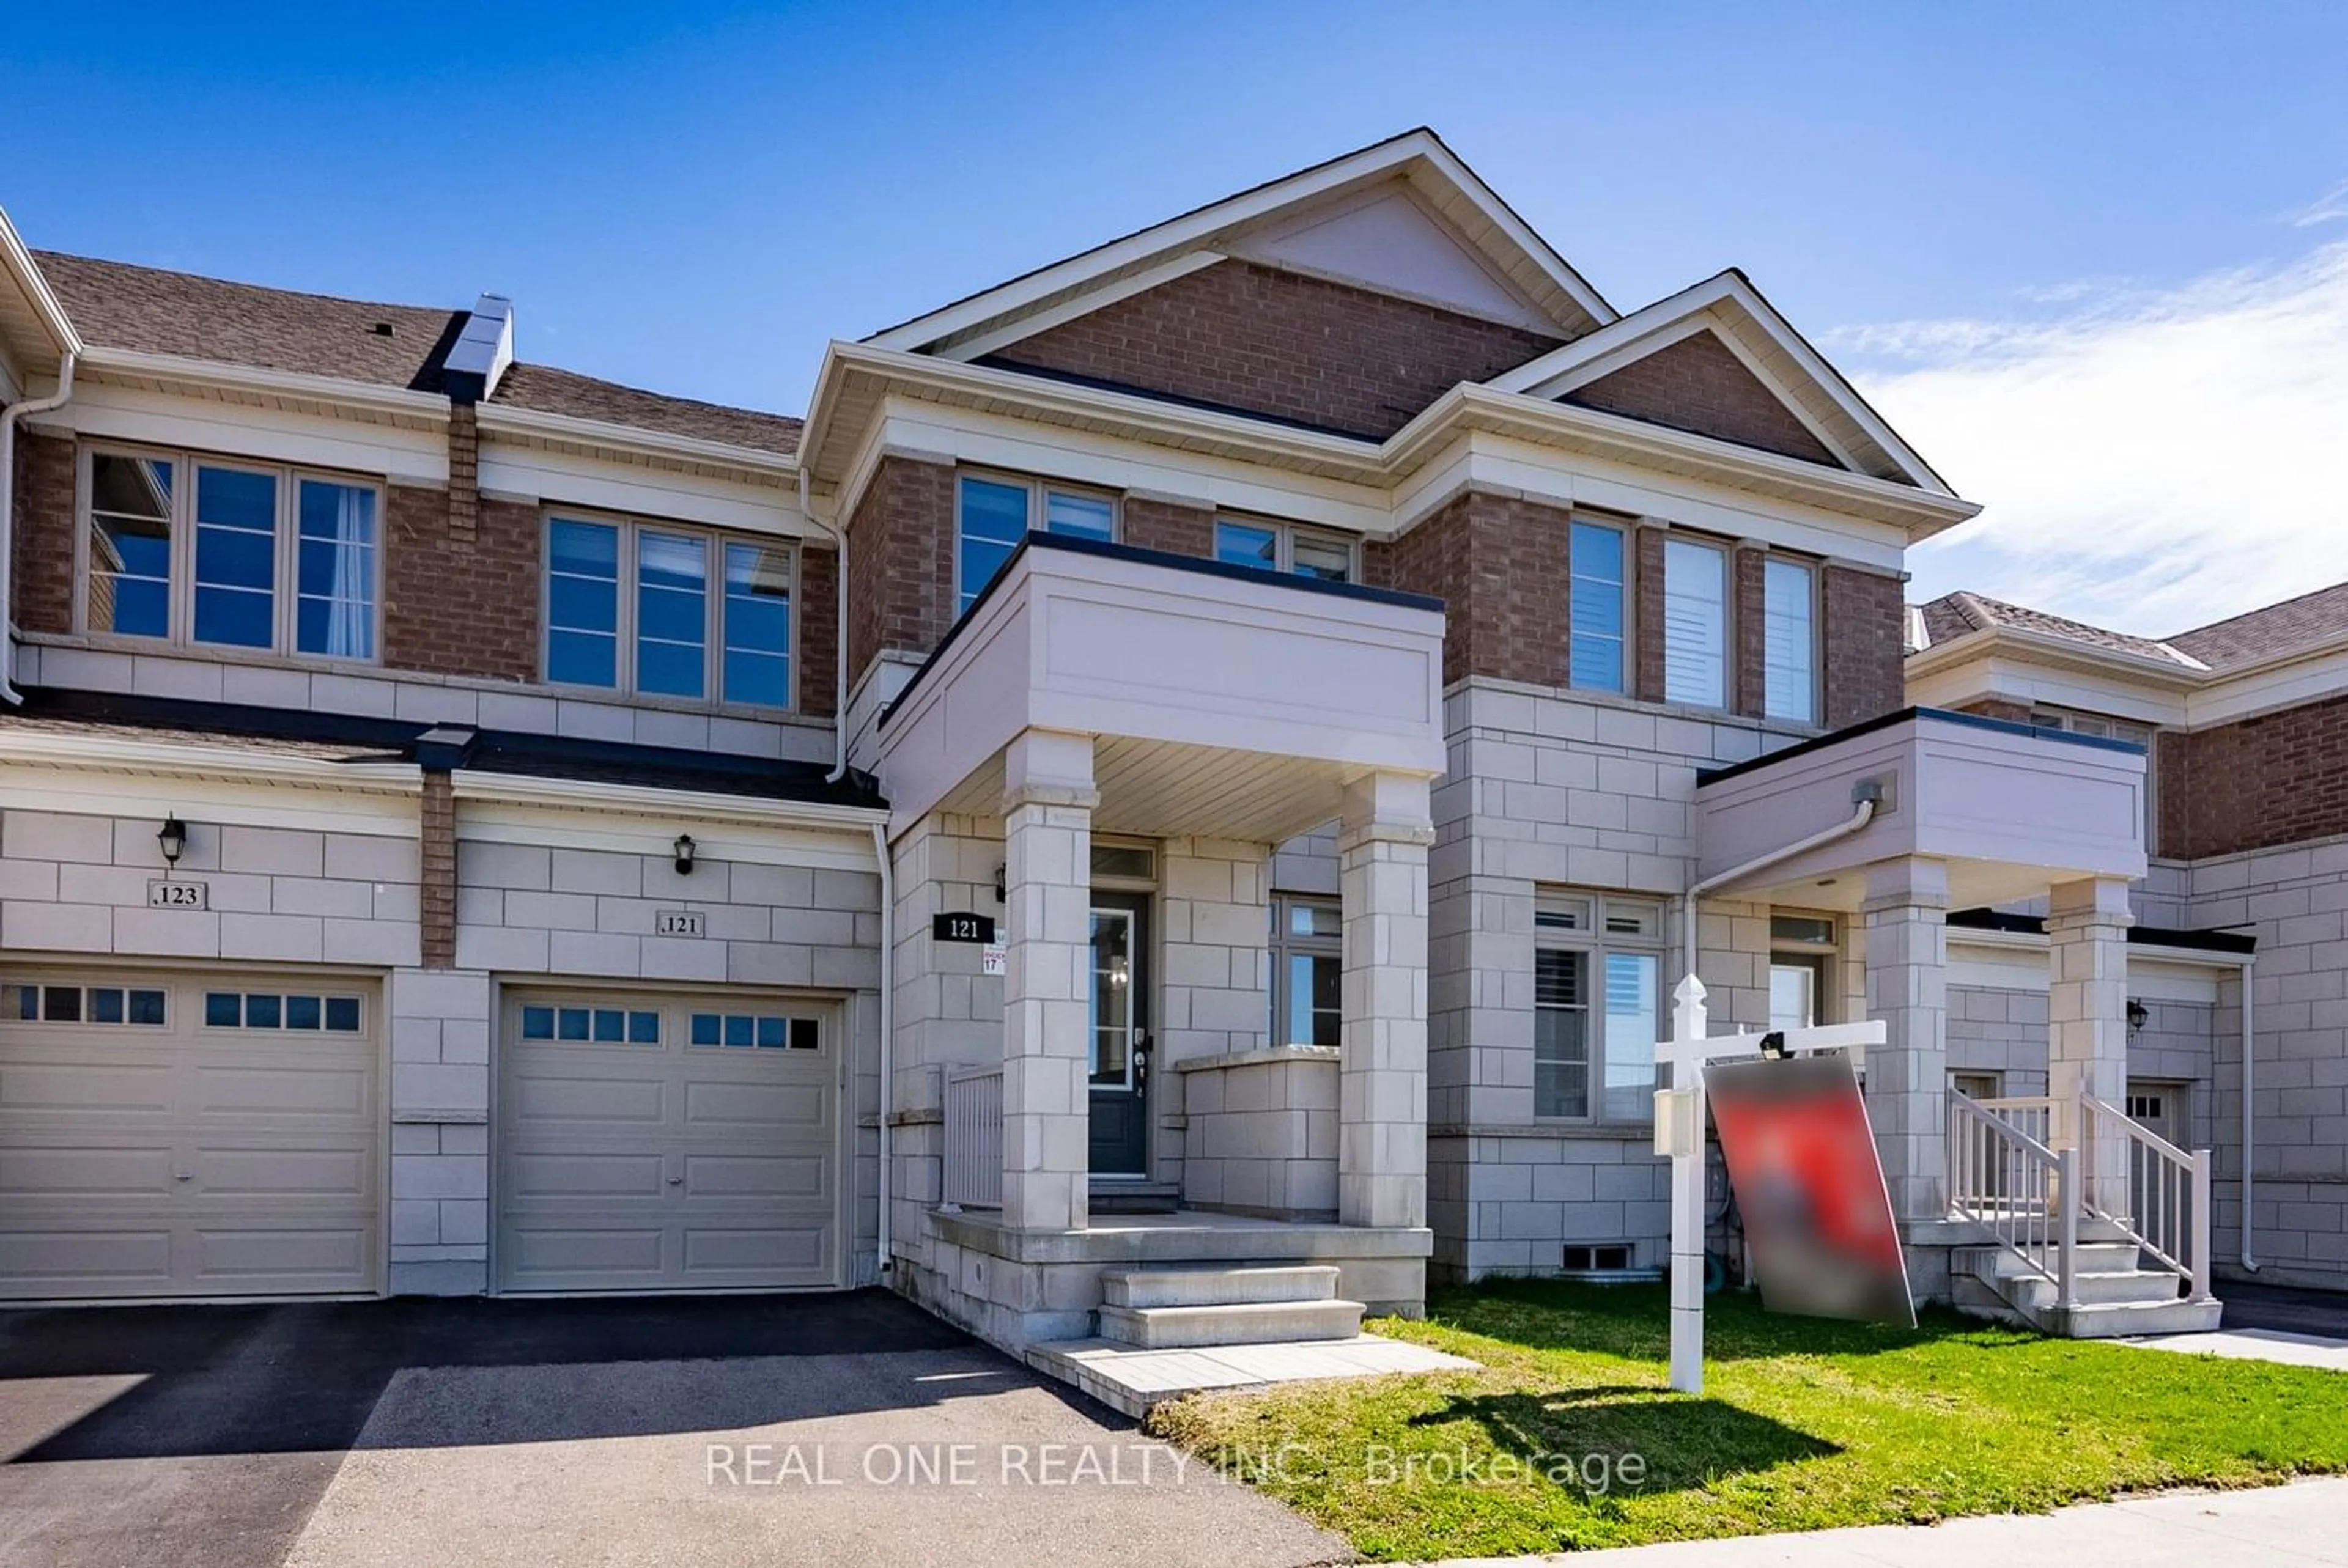 Home with brick exterior material for 121 Decast Cres, Markham Ontario L6B 1N8